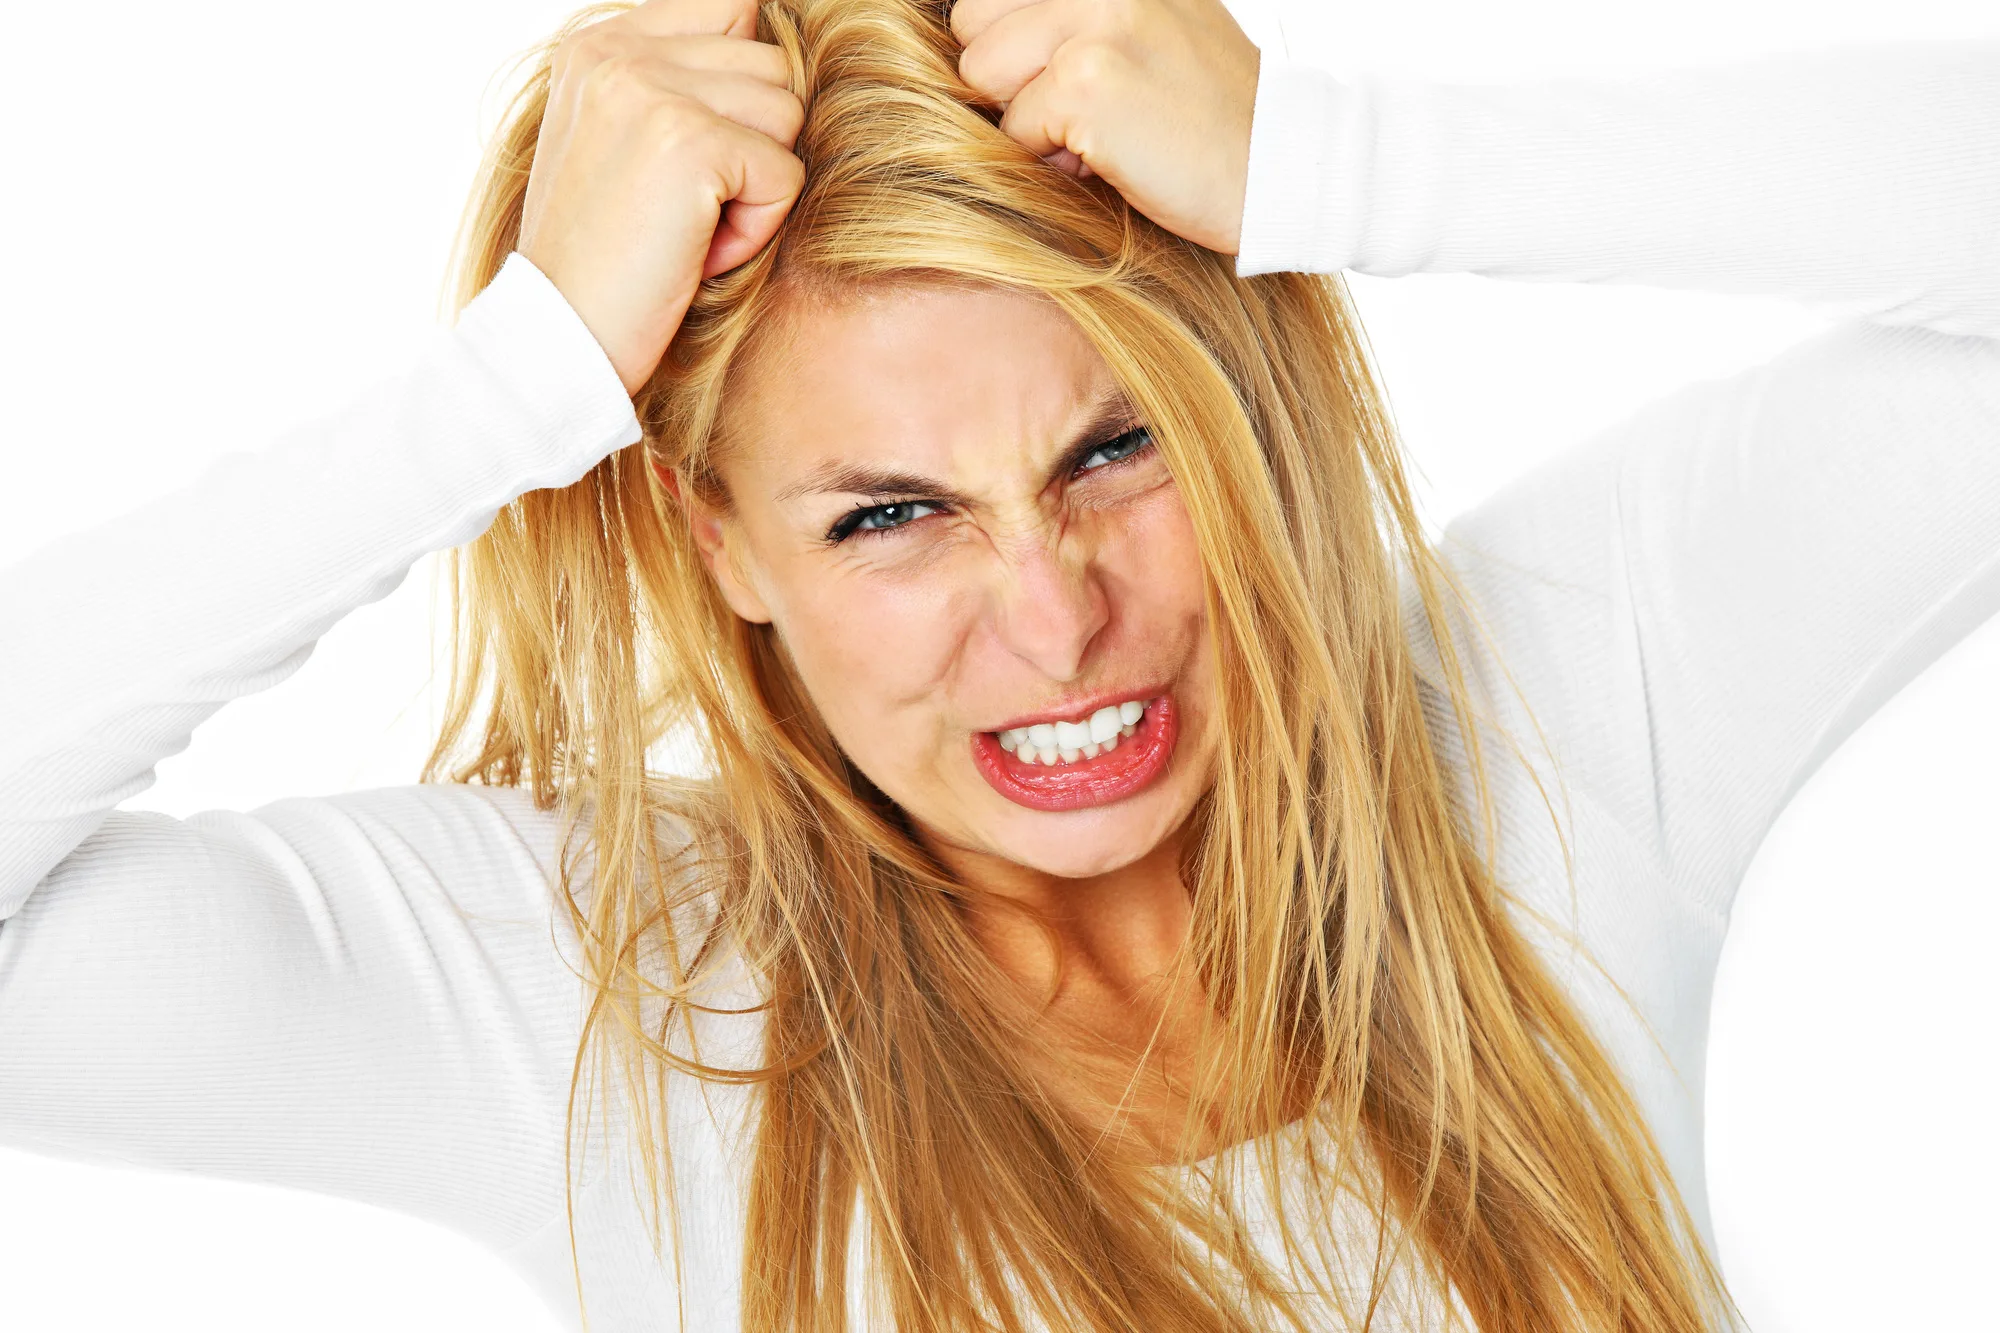 A picture of a young depressed woman tearing out her hair over white background